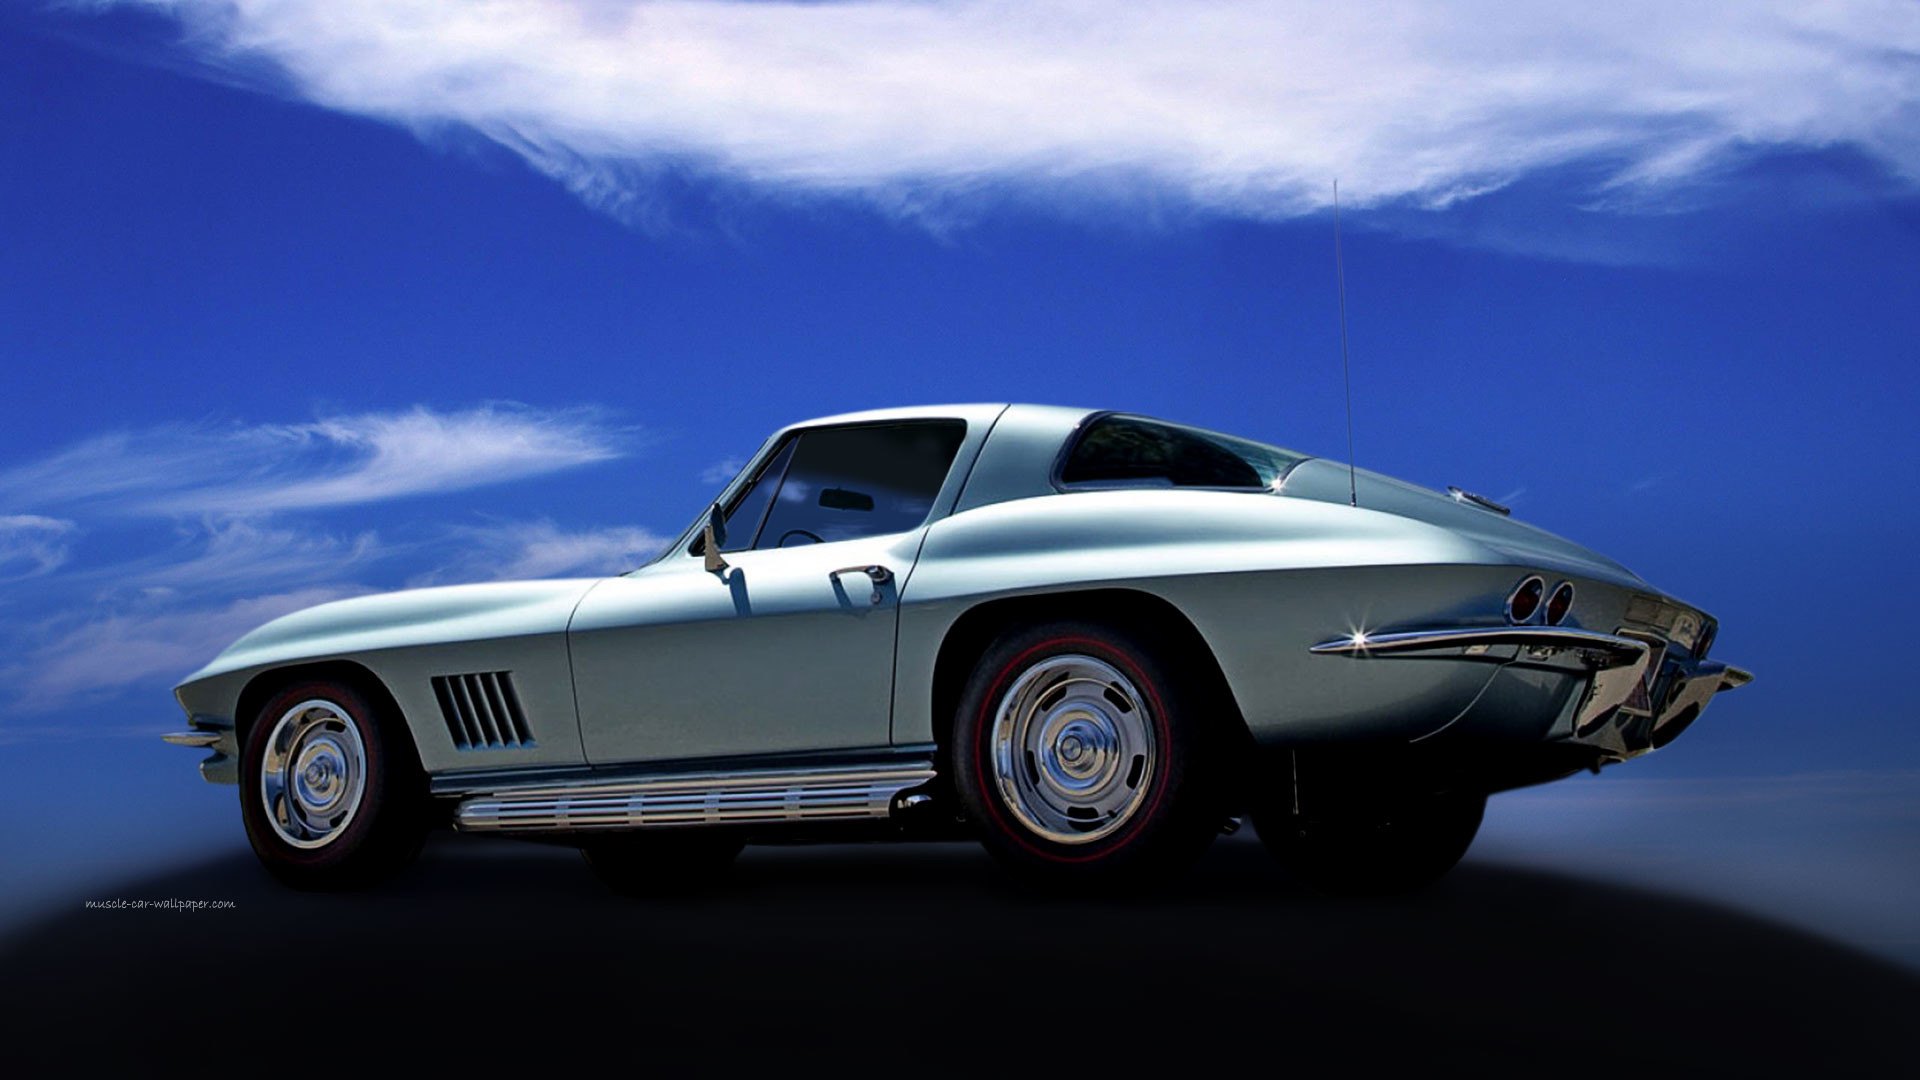 1920x1080 1967 Corvette Muscle Car Wallpaper | Other Sizes Available | 1920_09 |